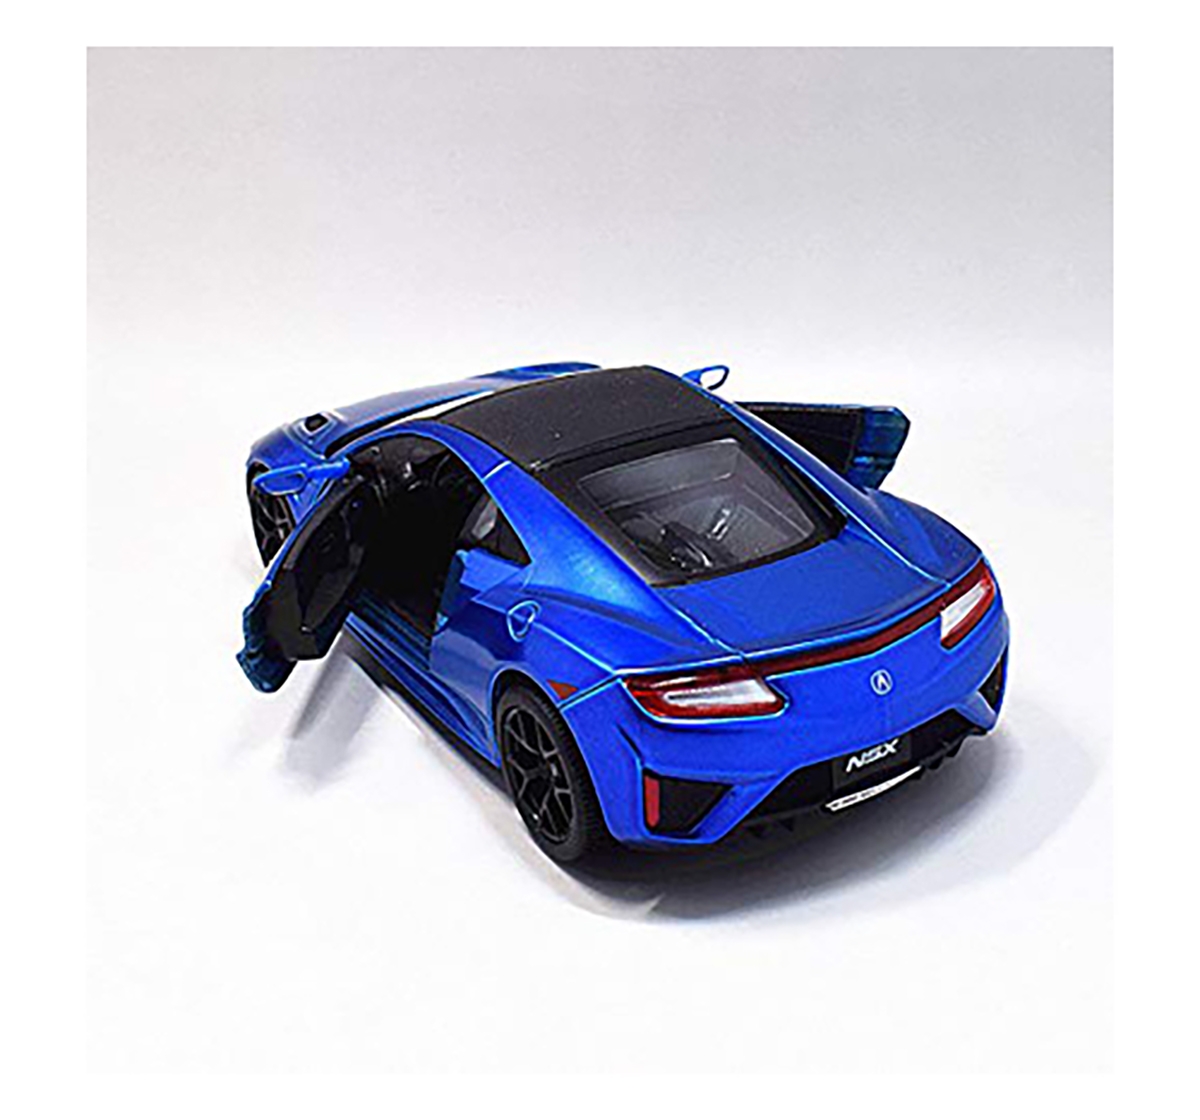 Msz | MSZ 1:31 Honda Acura NSX Car with Light and Sound for Kids age 3Y+ (Blue) 2